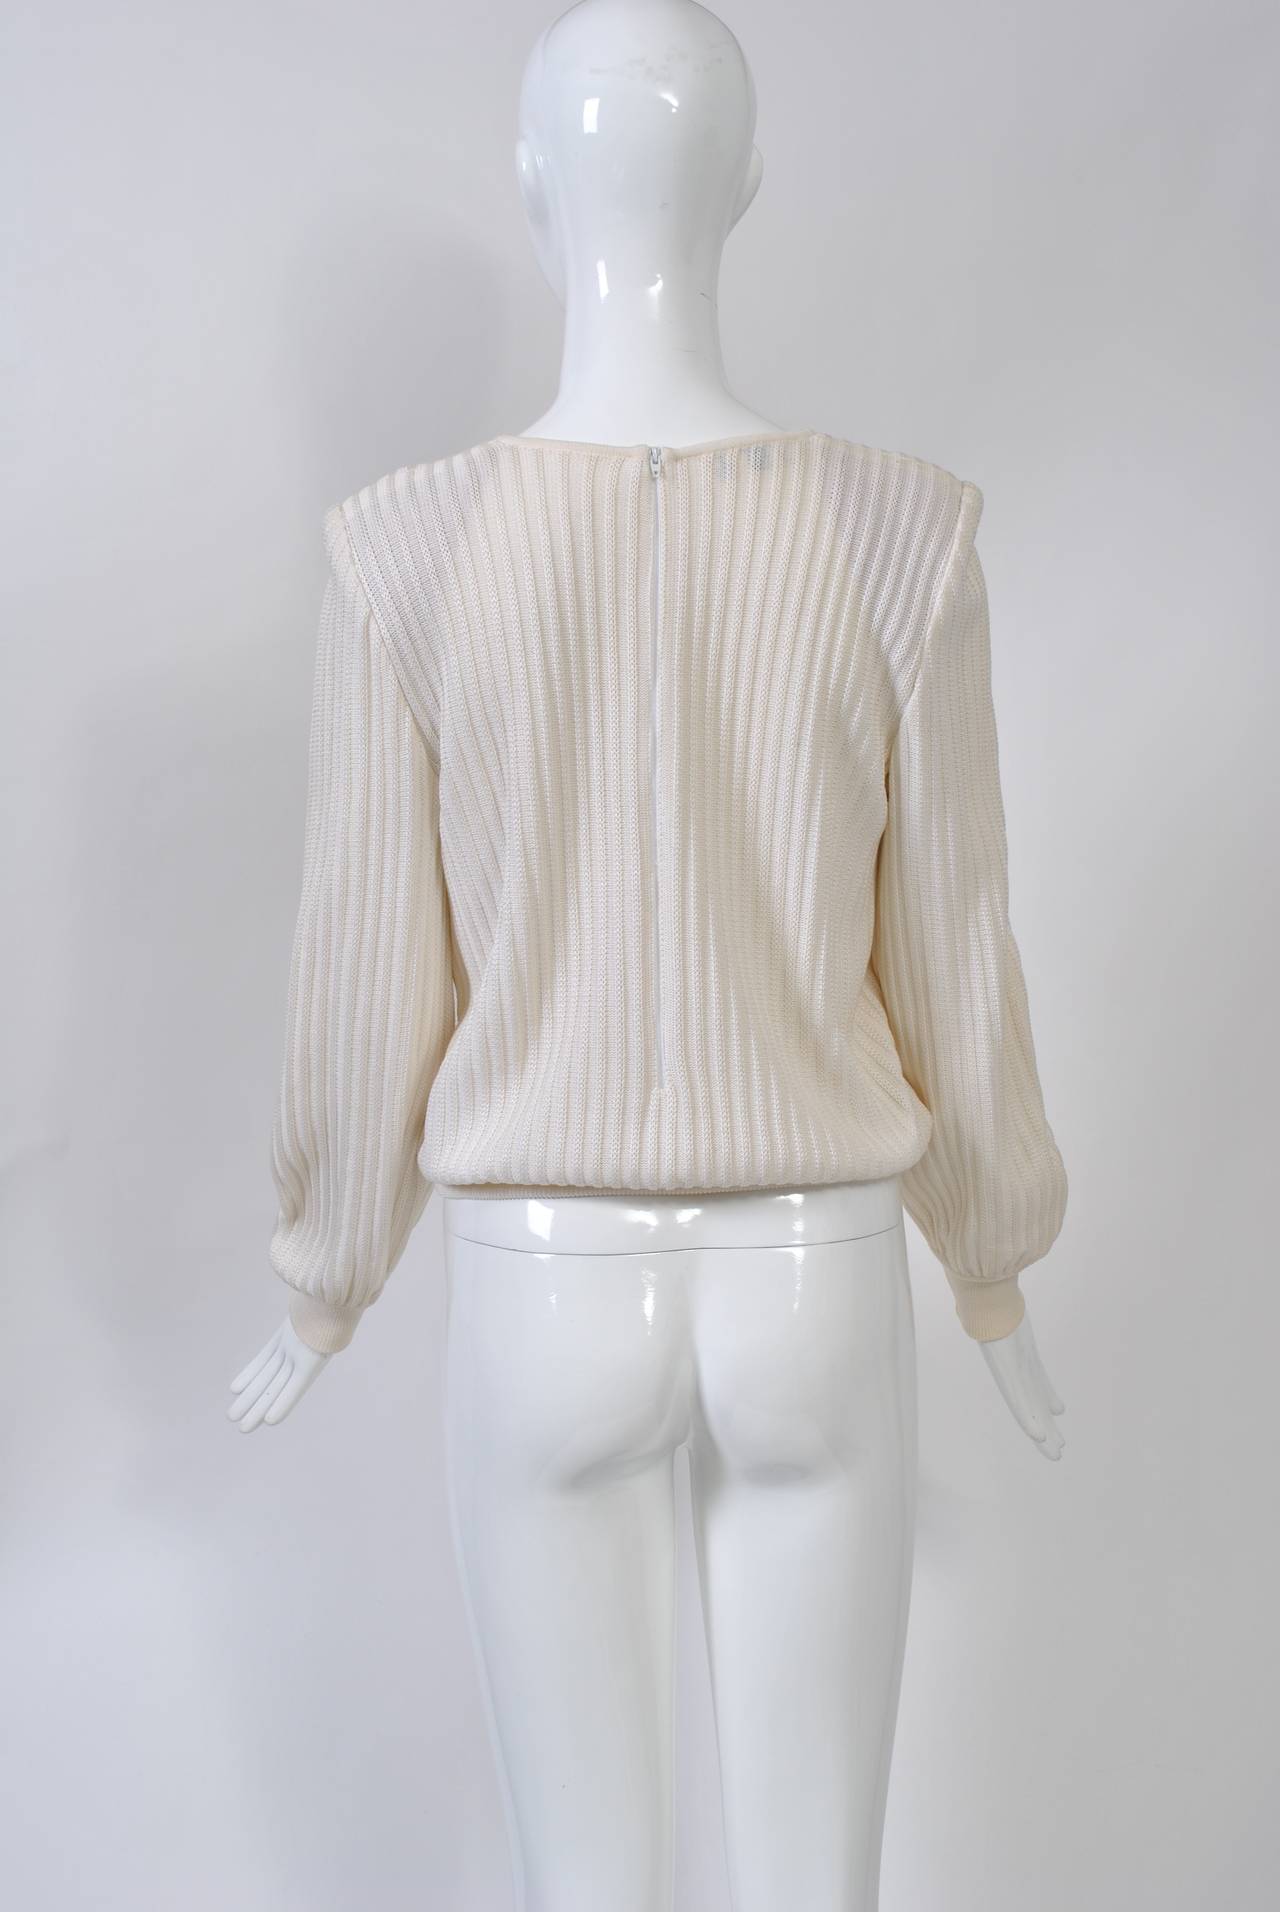 Valentino pullover in white ribbed wool knit with a triple flower design at top right. The perforated flowers are adorned with rhinestones. Flat knit cuffs and hip band. Back zipper.